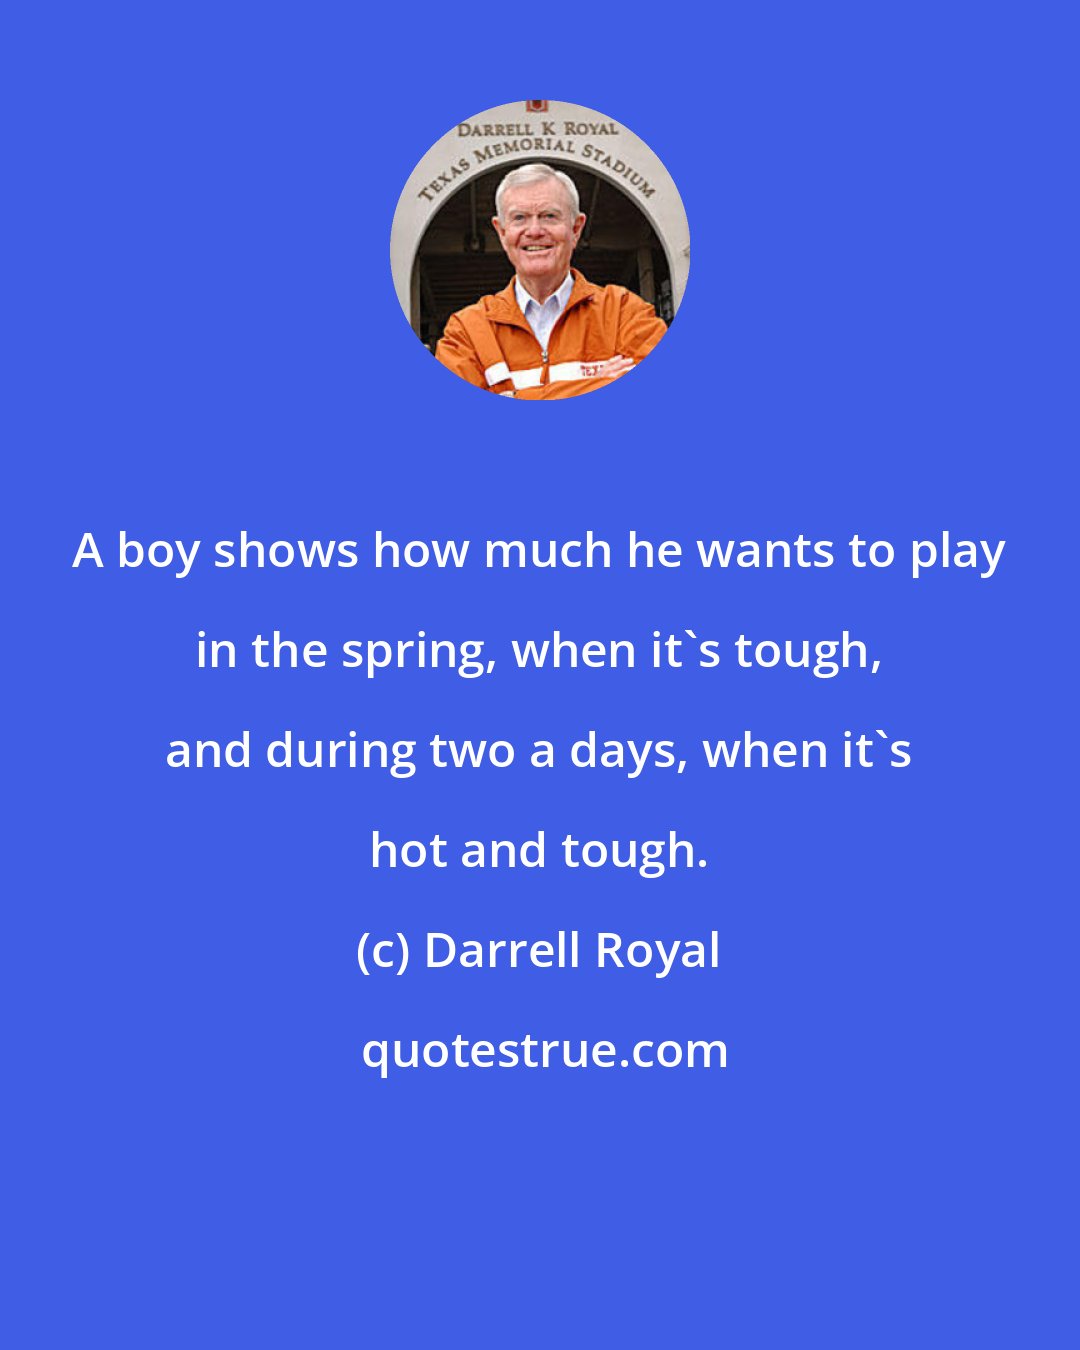 Darrell Royal: A boy shows how much he wants to play in the spring, when it's tough, and during two a days, when it's hot and tough.